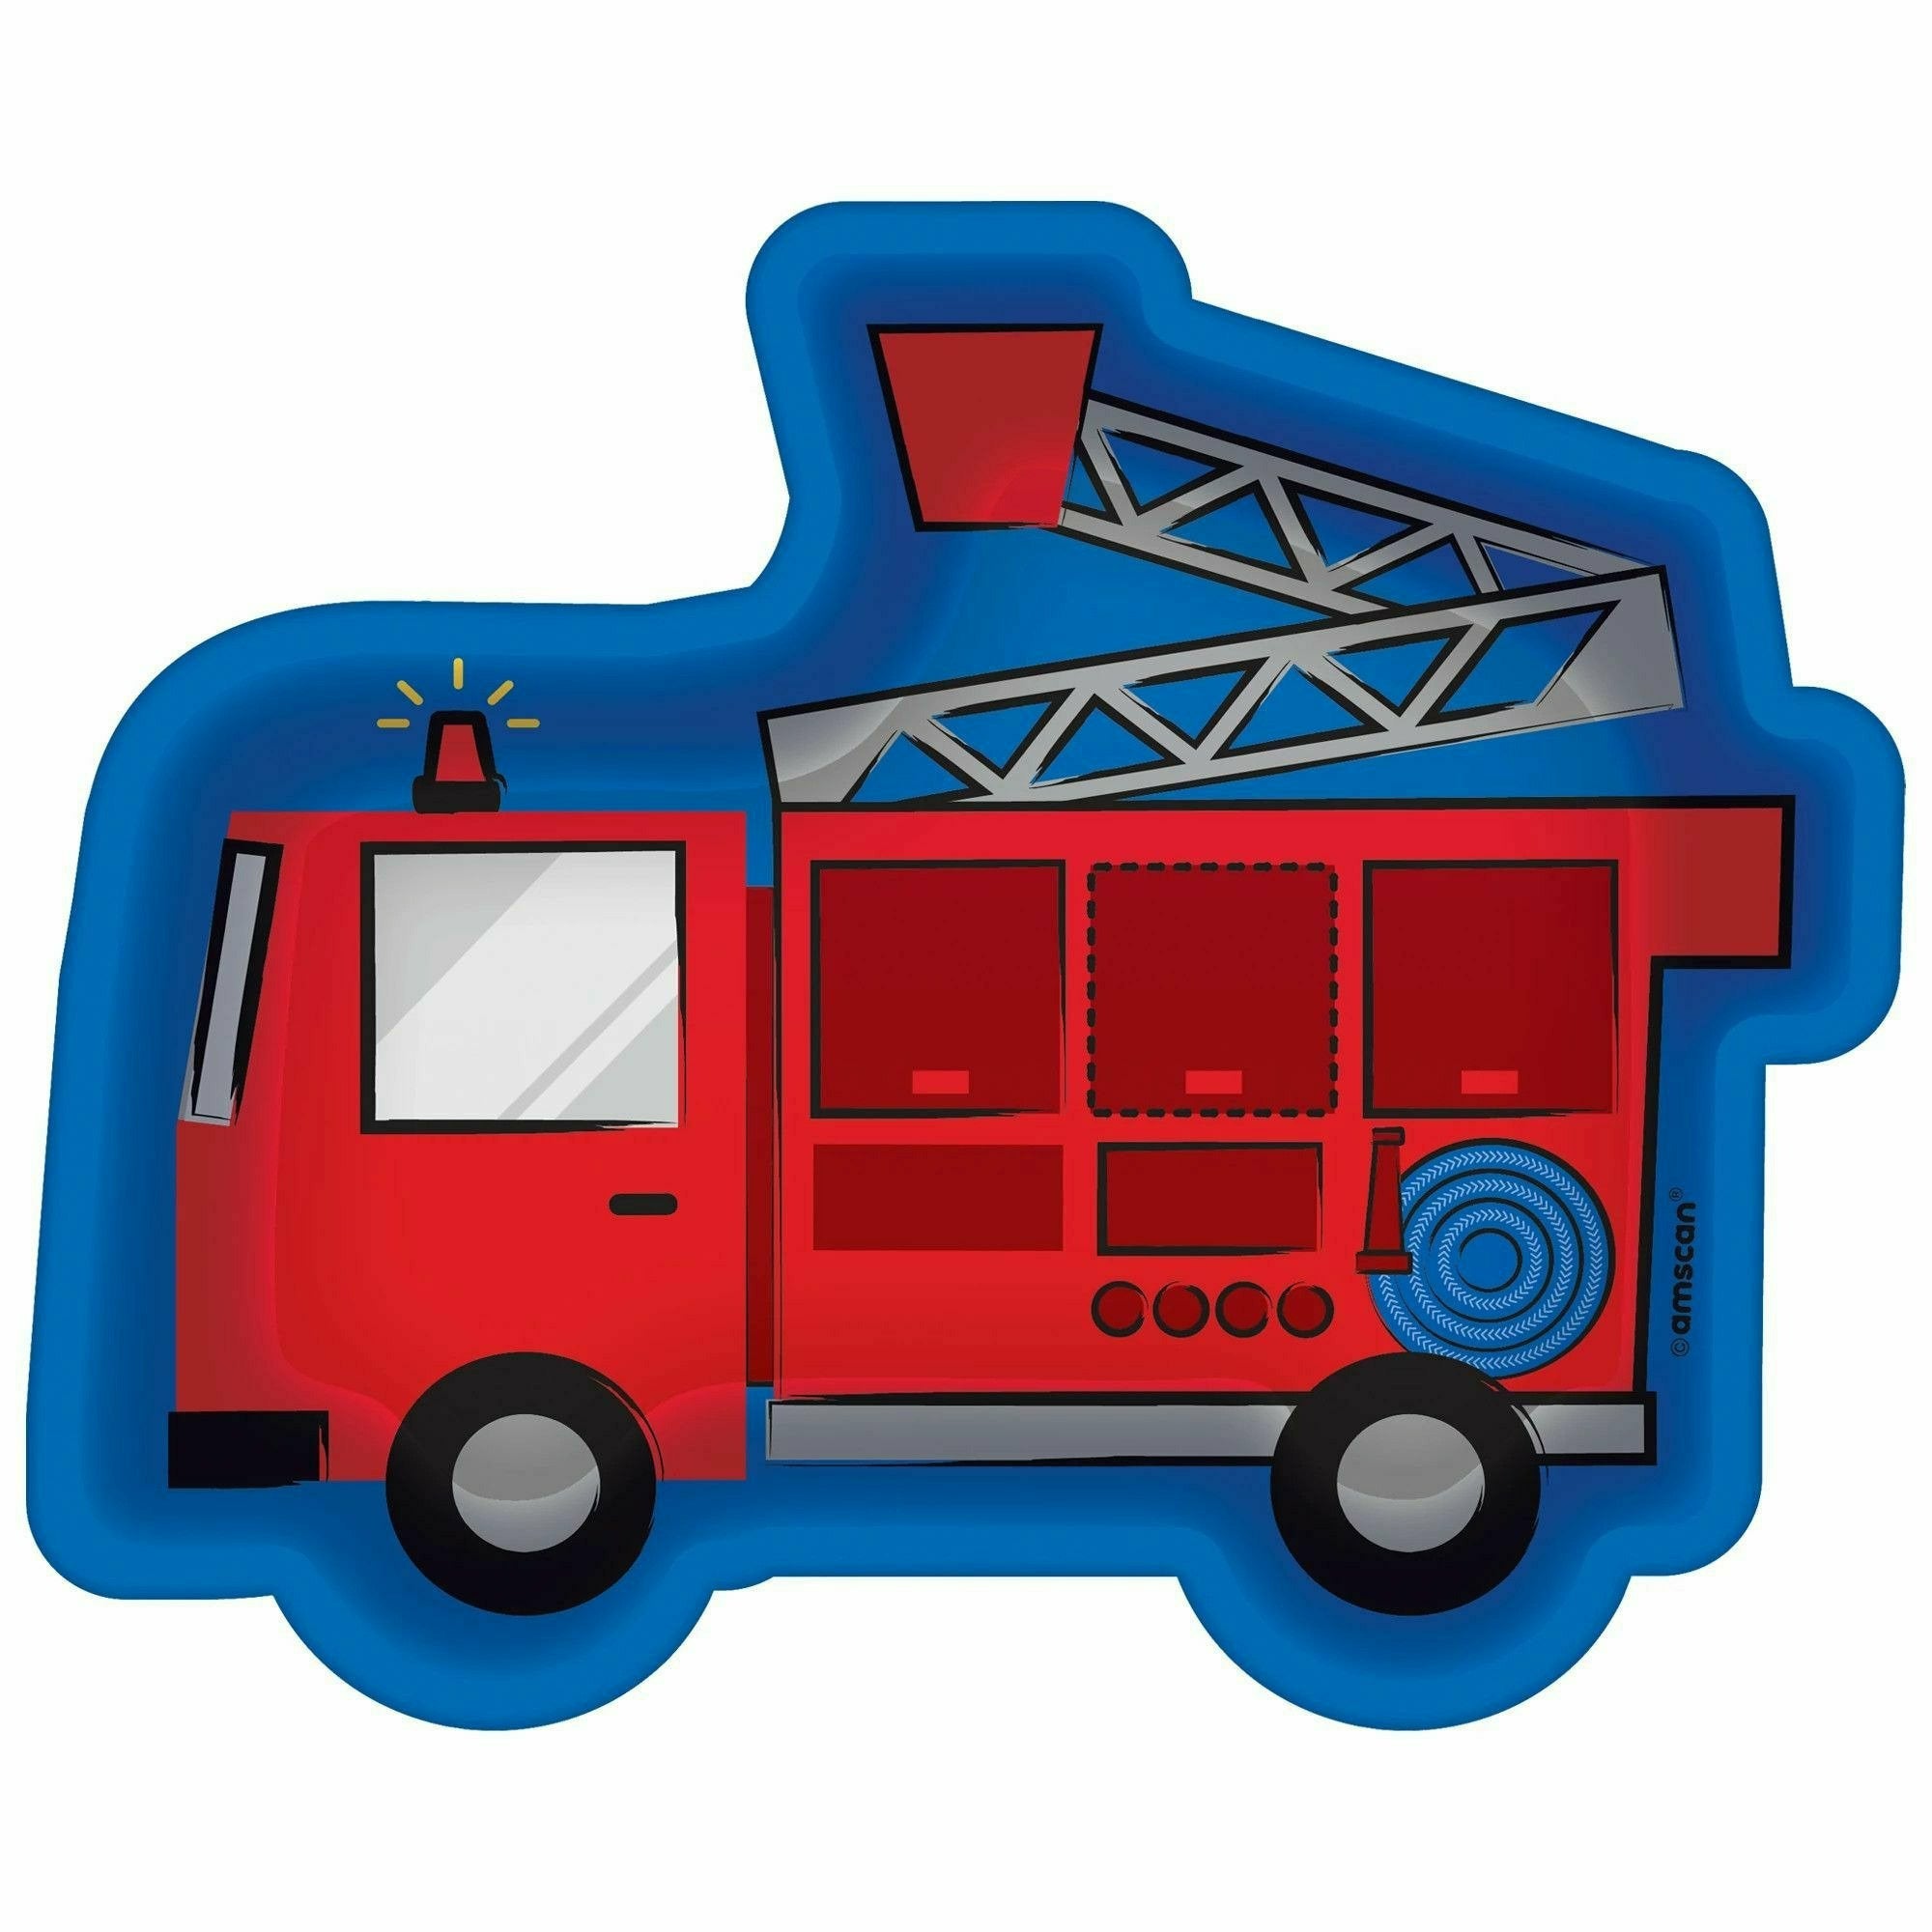 Amscan BIRTHDAY: JUVENILE Fire Truck Shaped Plates, 7"